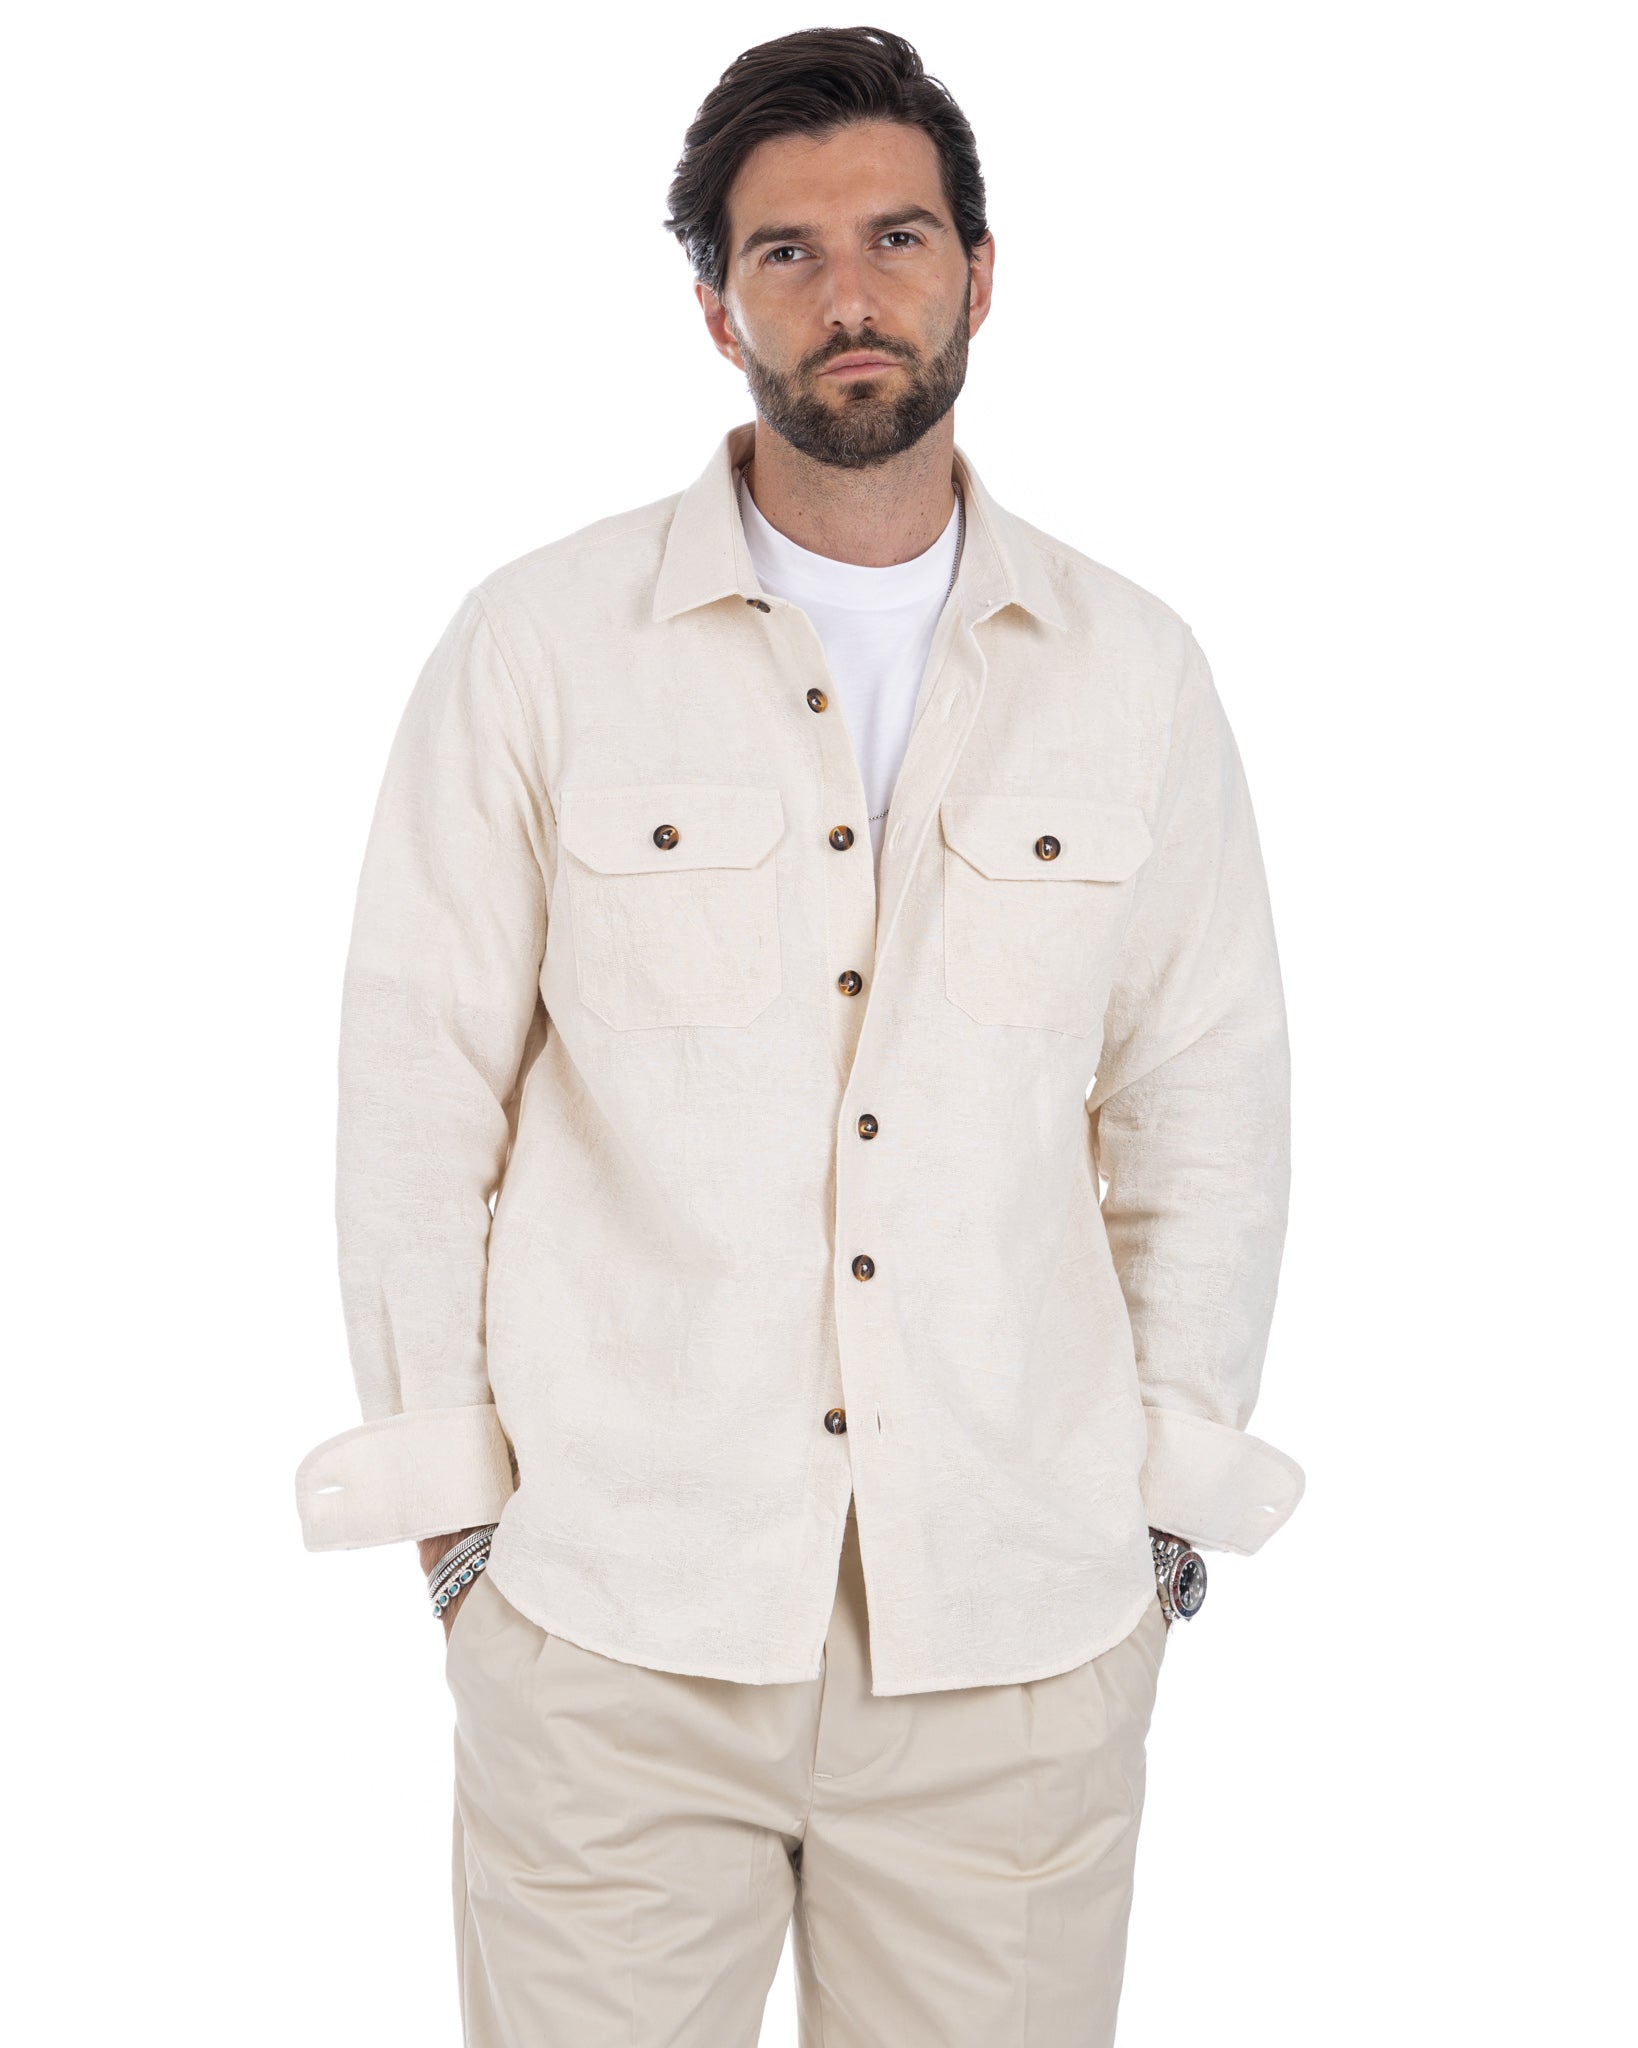 Bahama - cream shirt with relief pattern